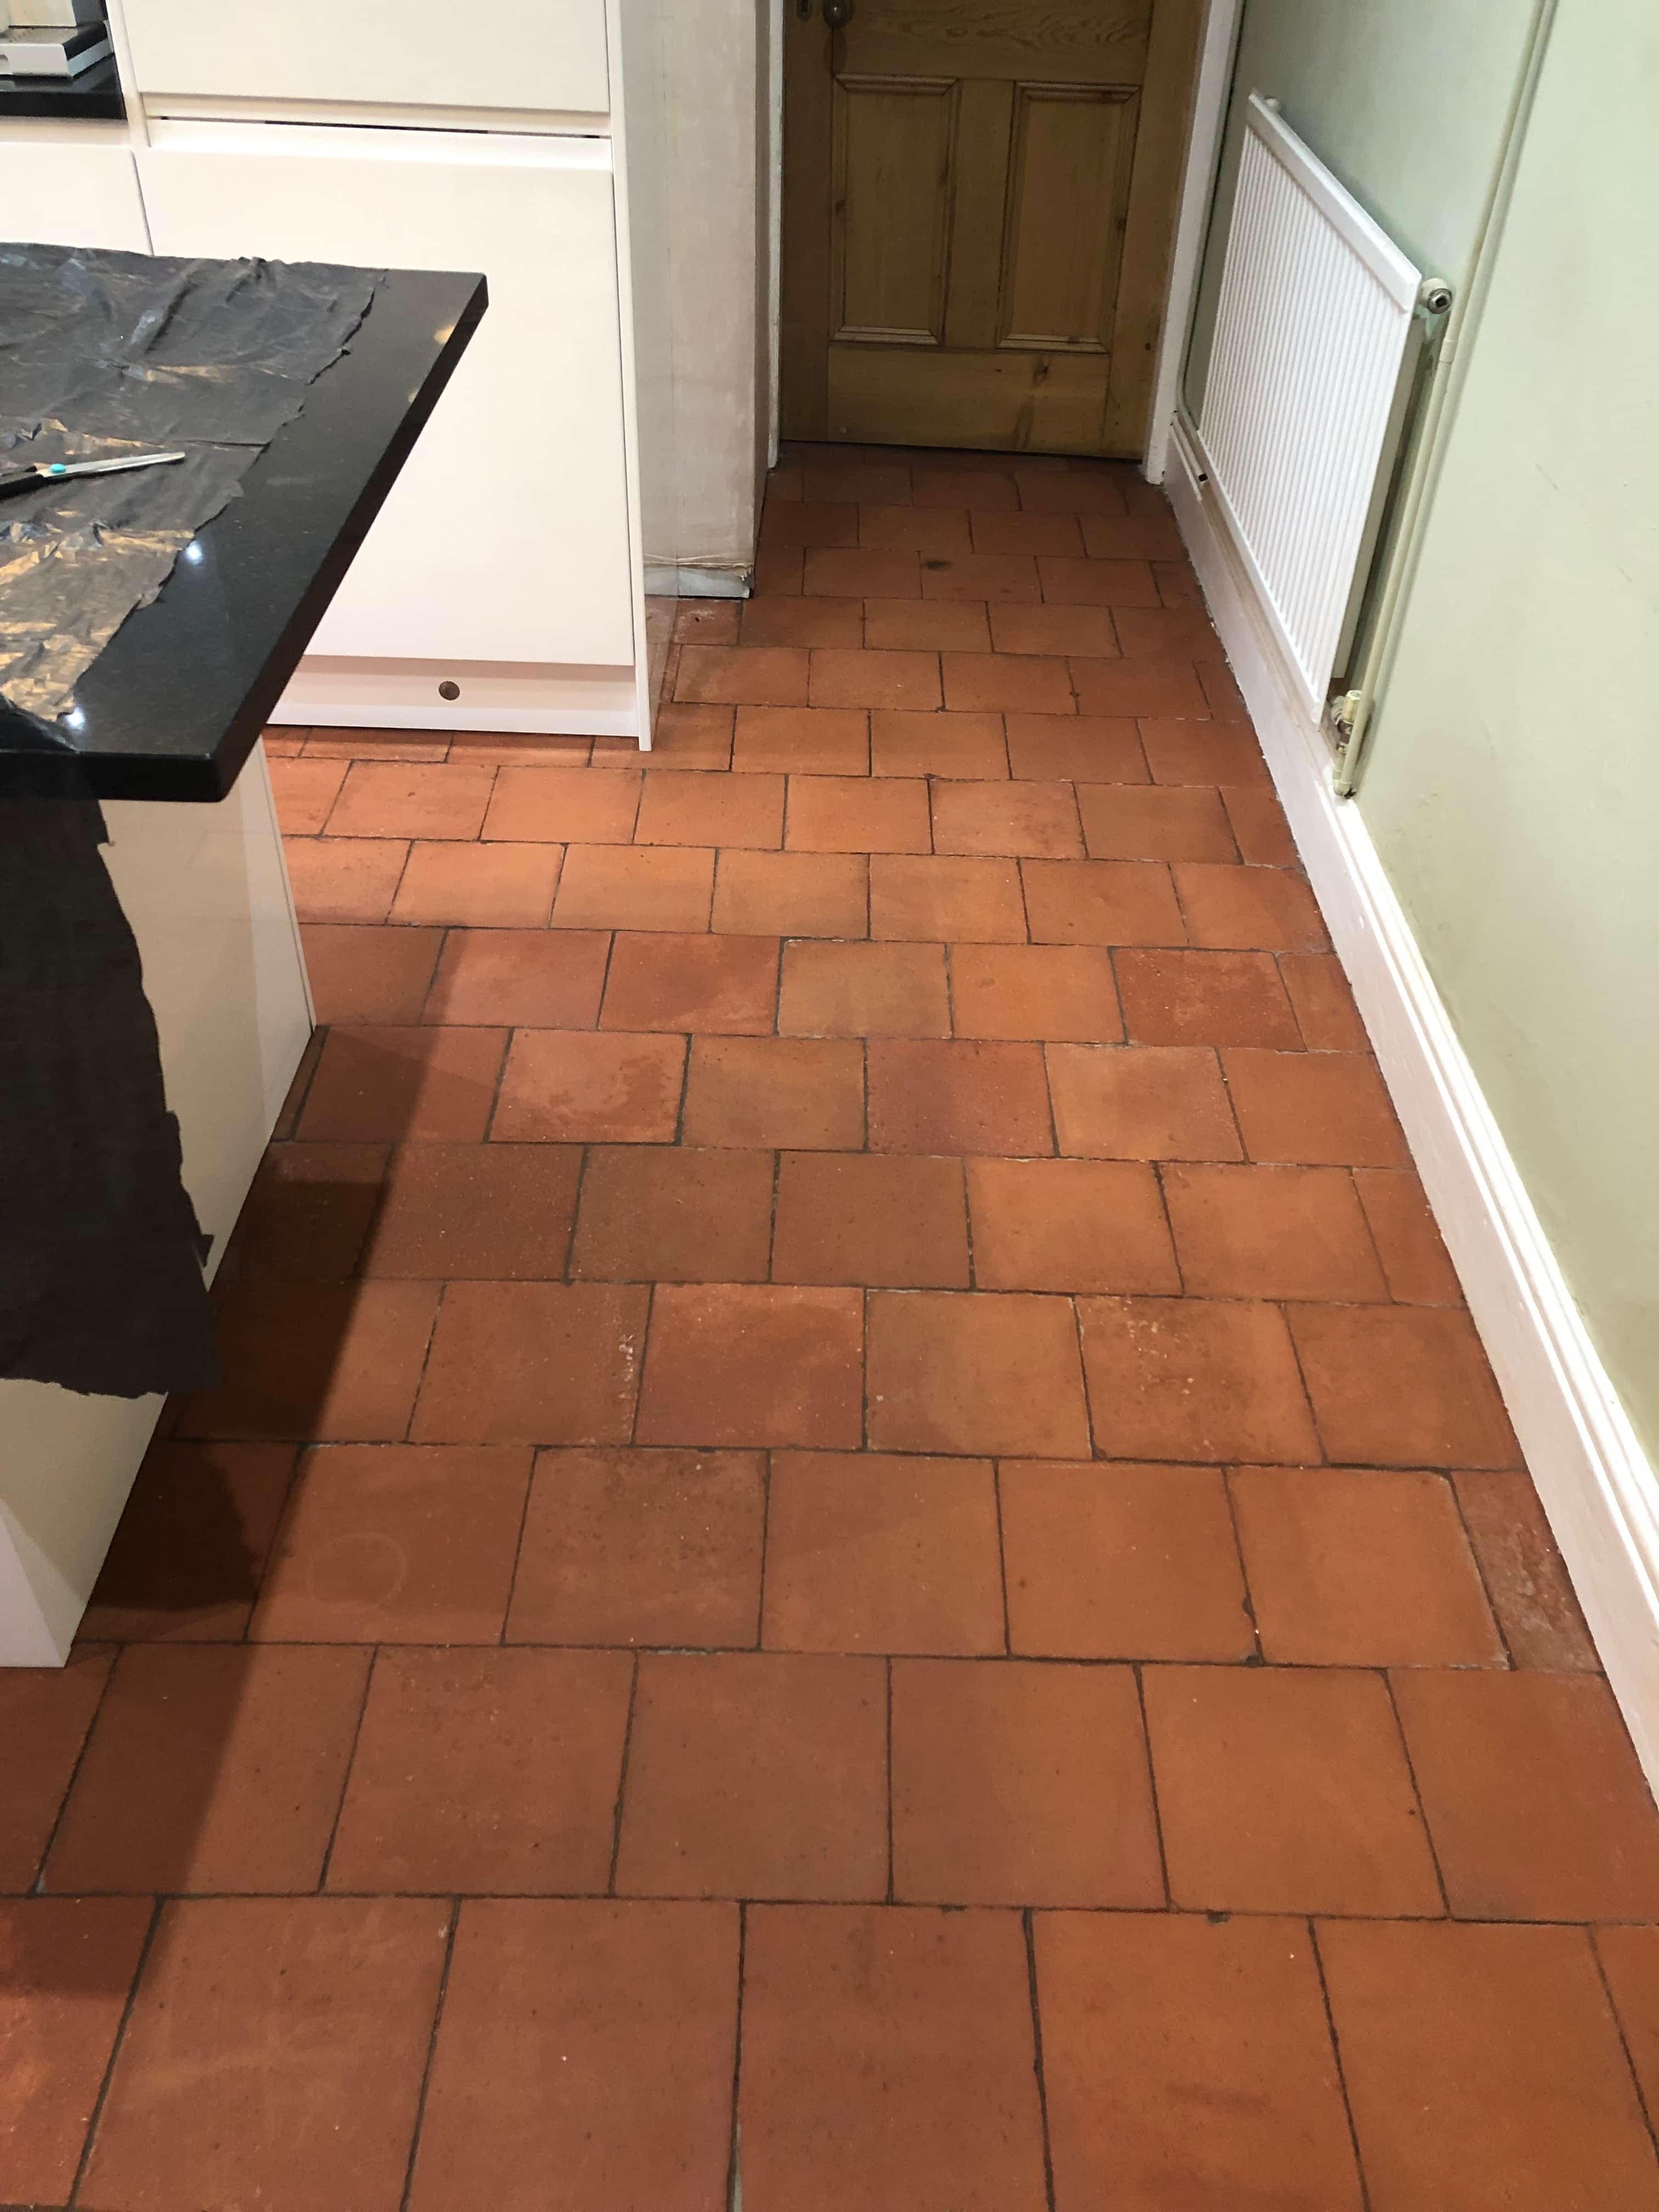 Quarry Tiled Kitchen Floor After Repair and Cleaning Droitwich Spa